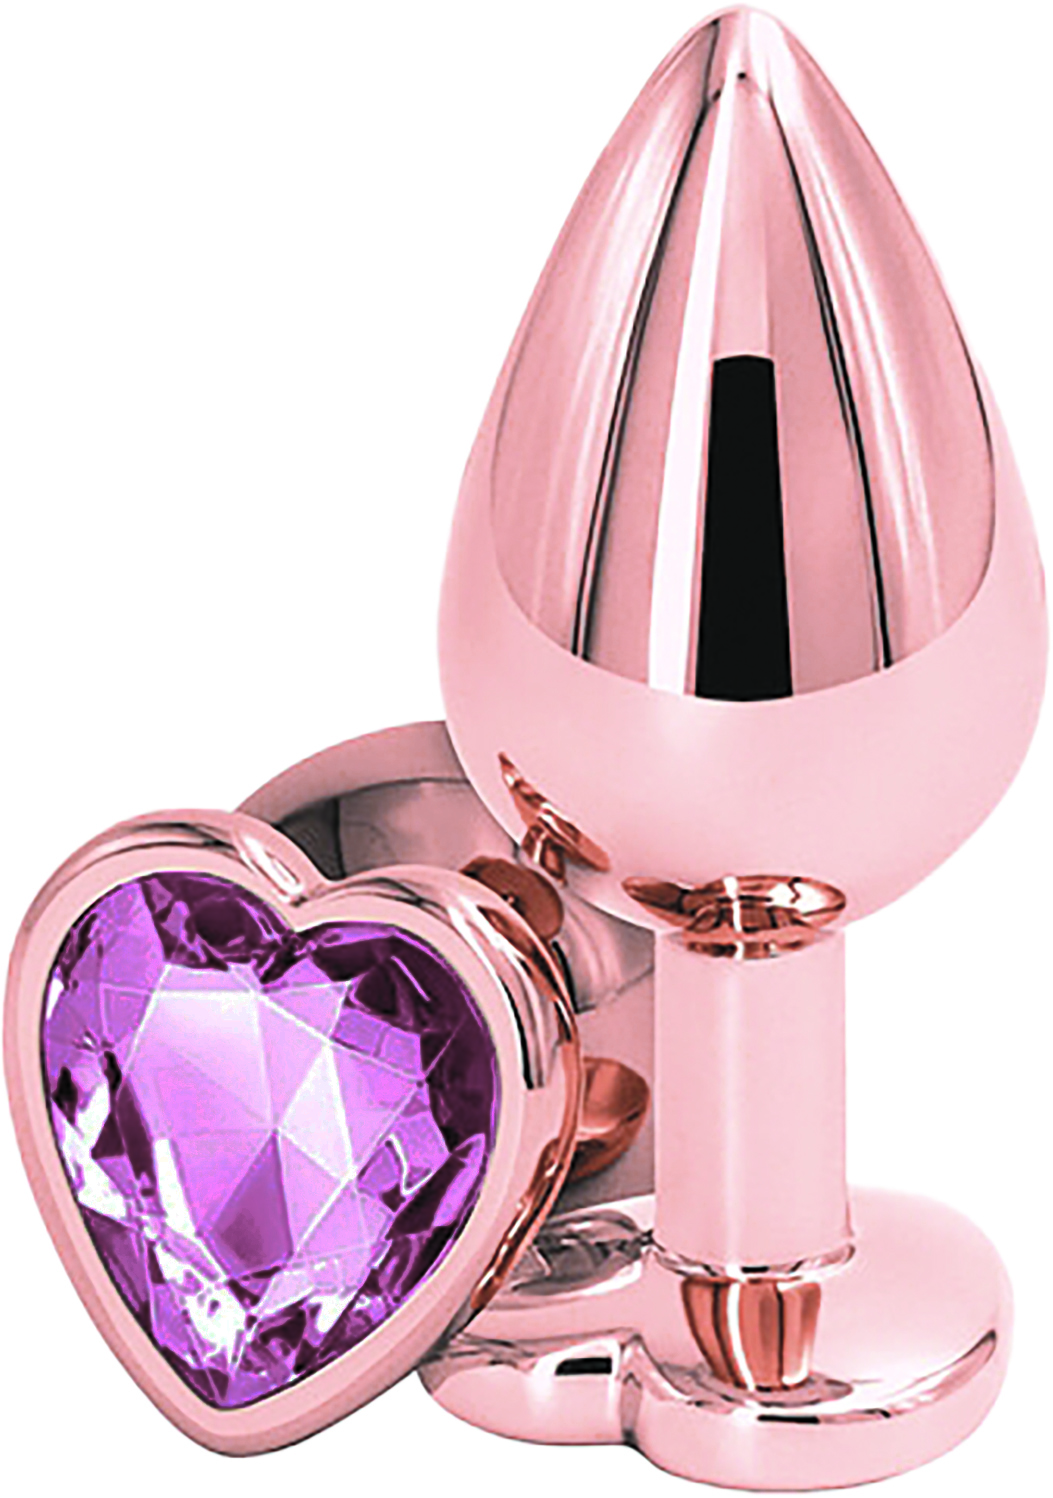 Dop Anal Brilliant Anal Plug Small, Rose Gold, Piatra Roz, Passion Labs